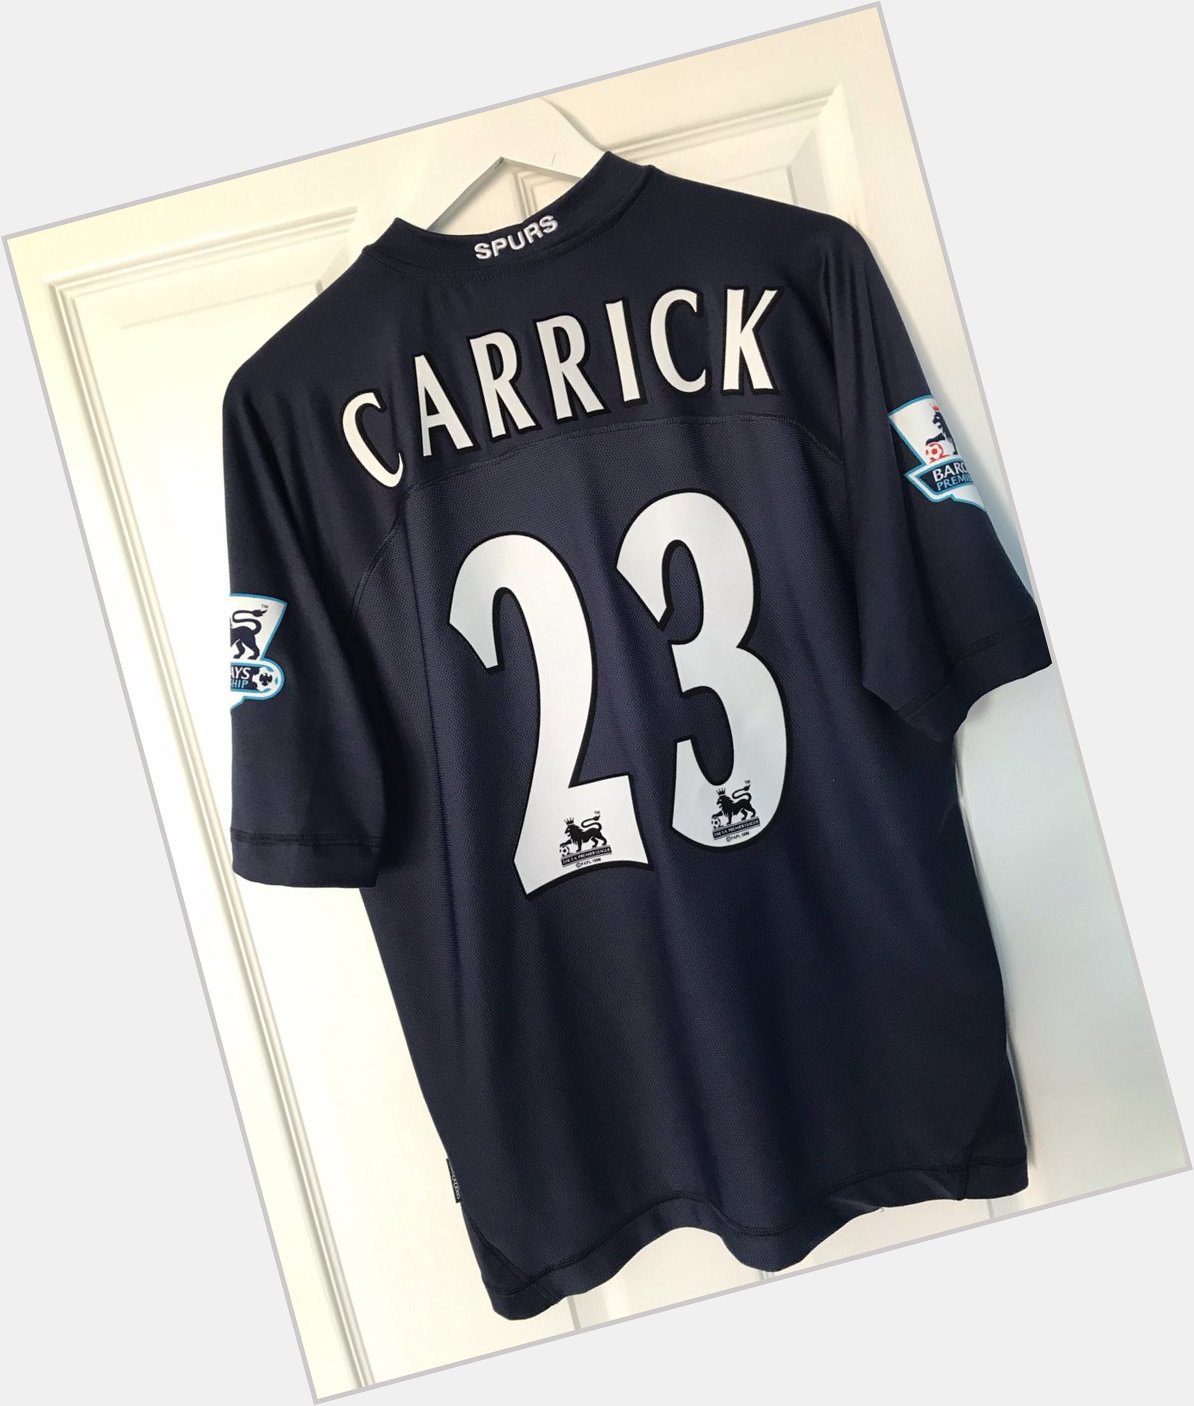 Happy birthday Michael Carrick. Seldom mentioned in terms of Tottenham, but a top player 